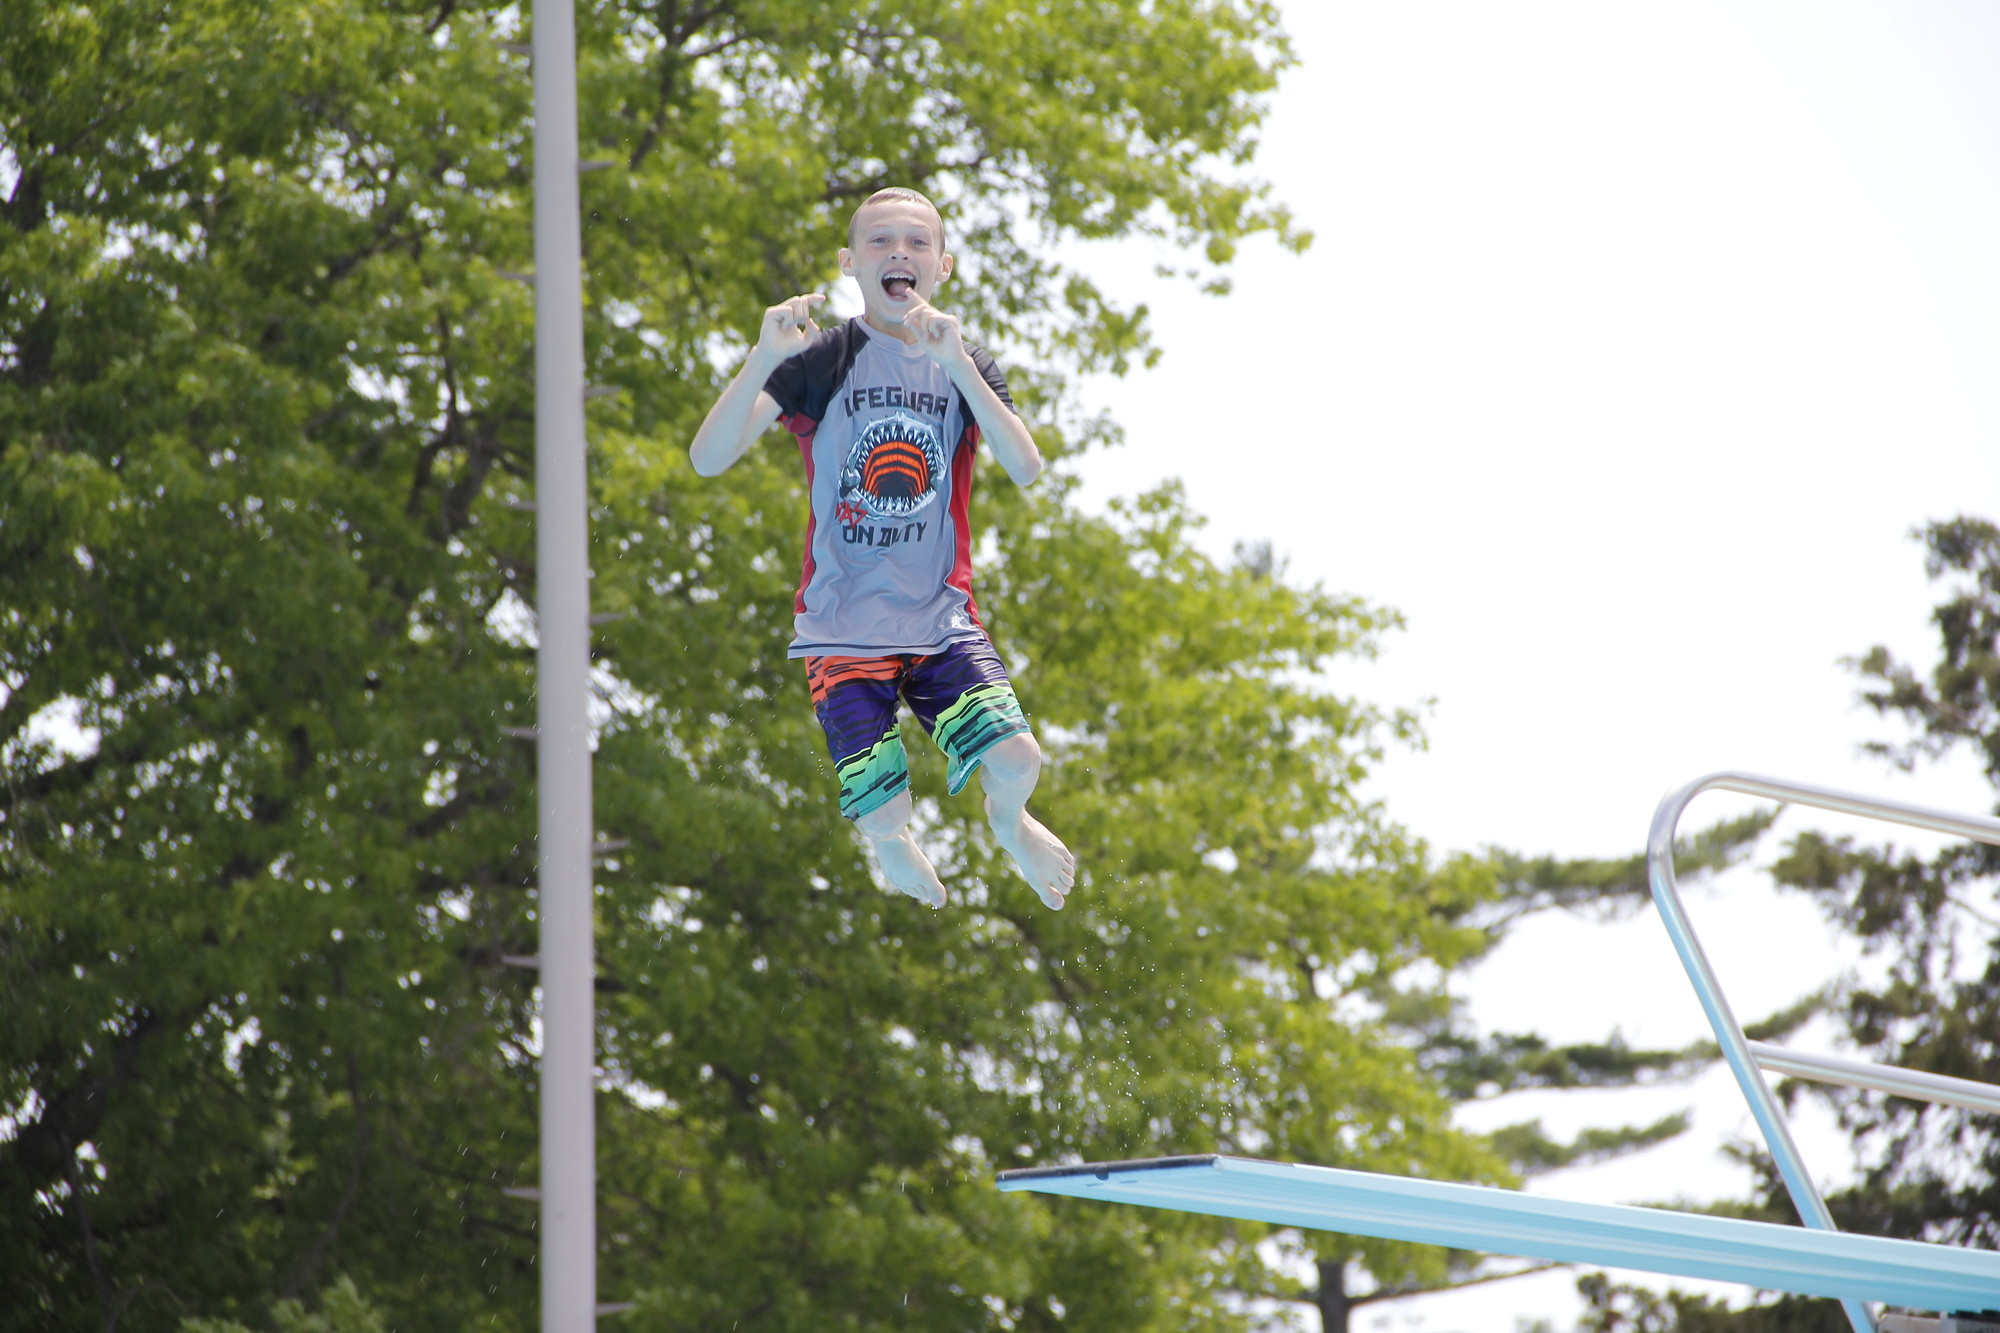 Anthony Cavanagh, 12, jumped, spun, dove and even posed for the camera on his various jumps off the diving board